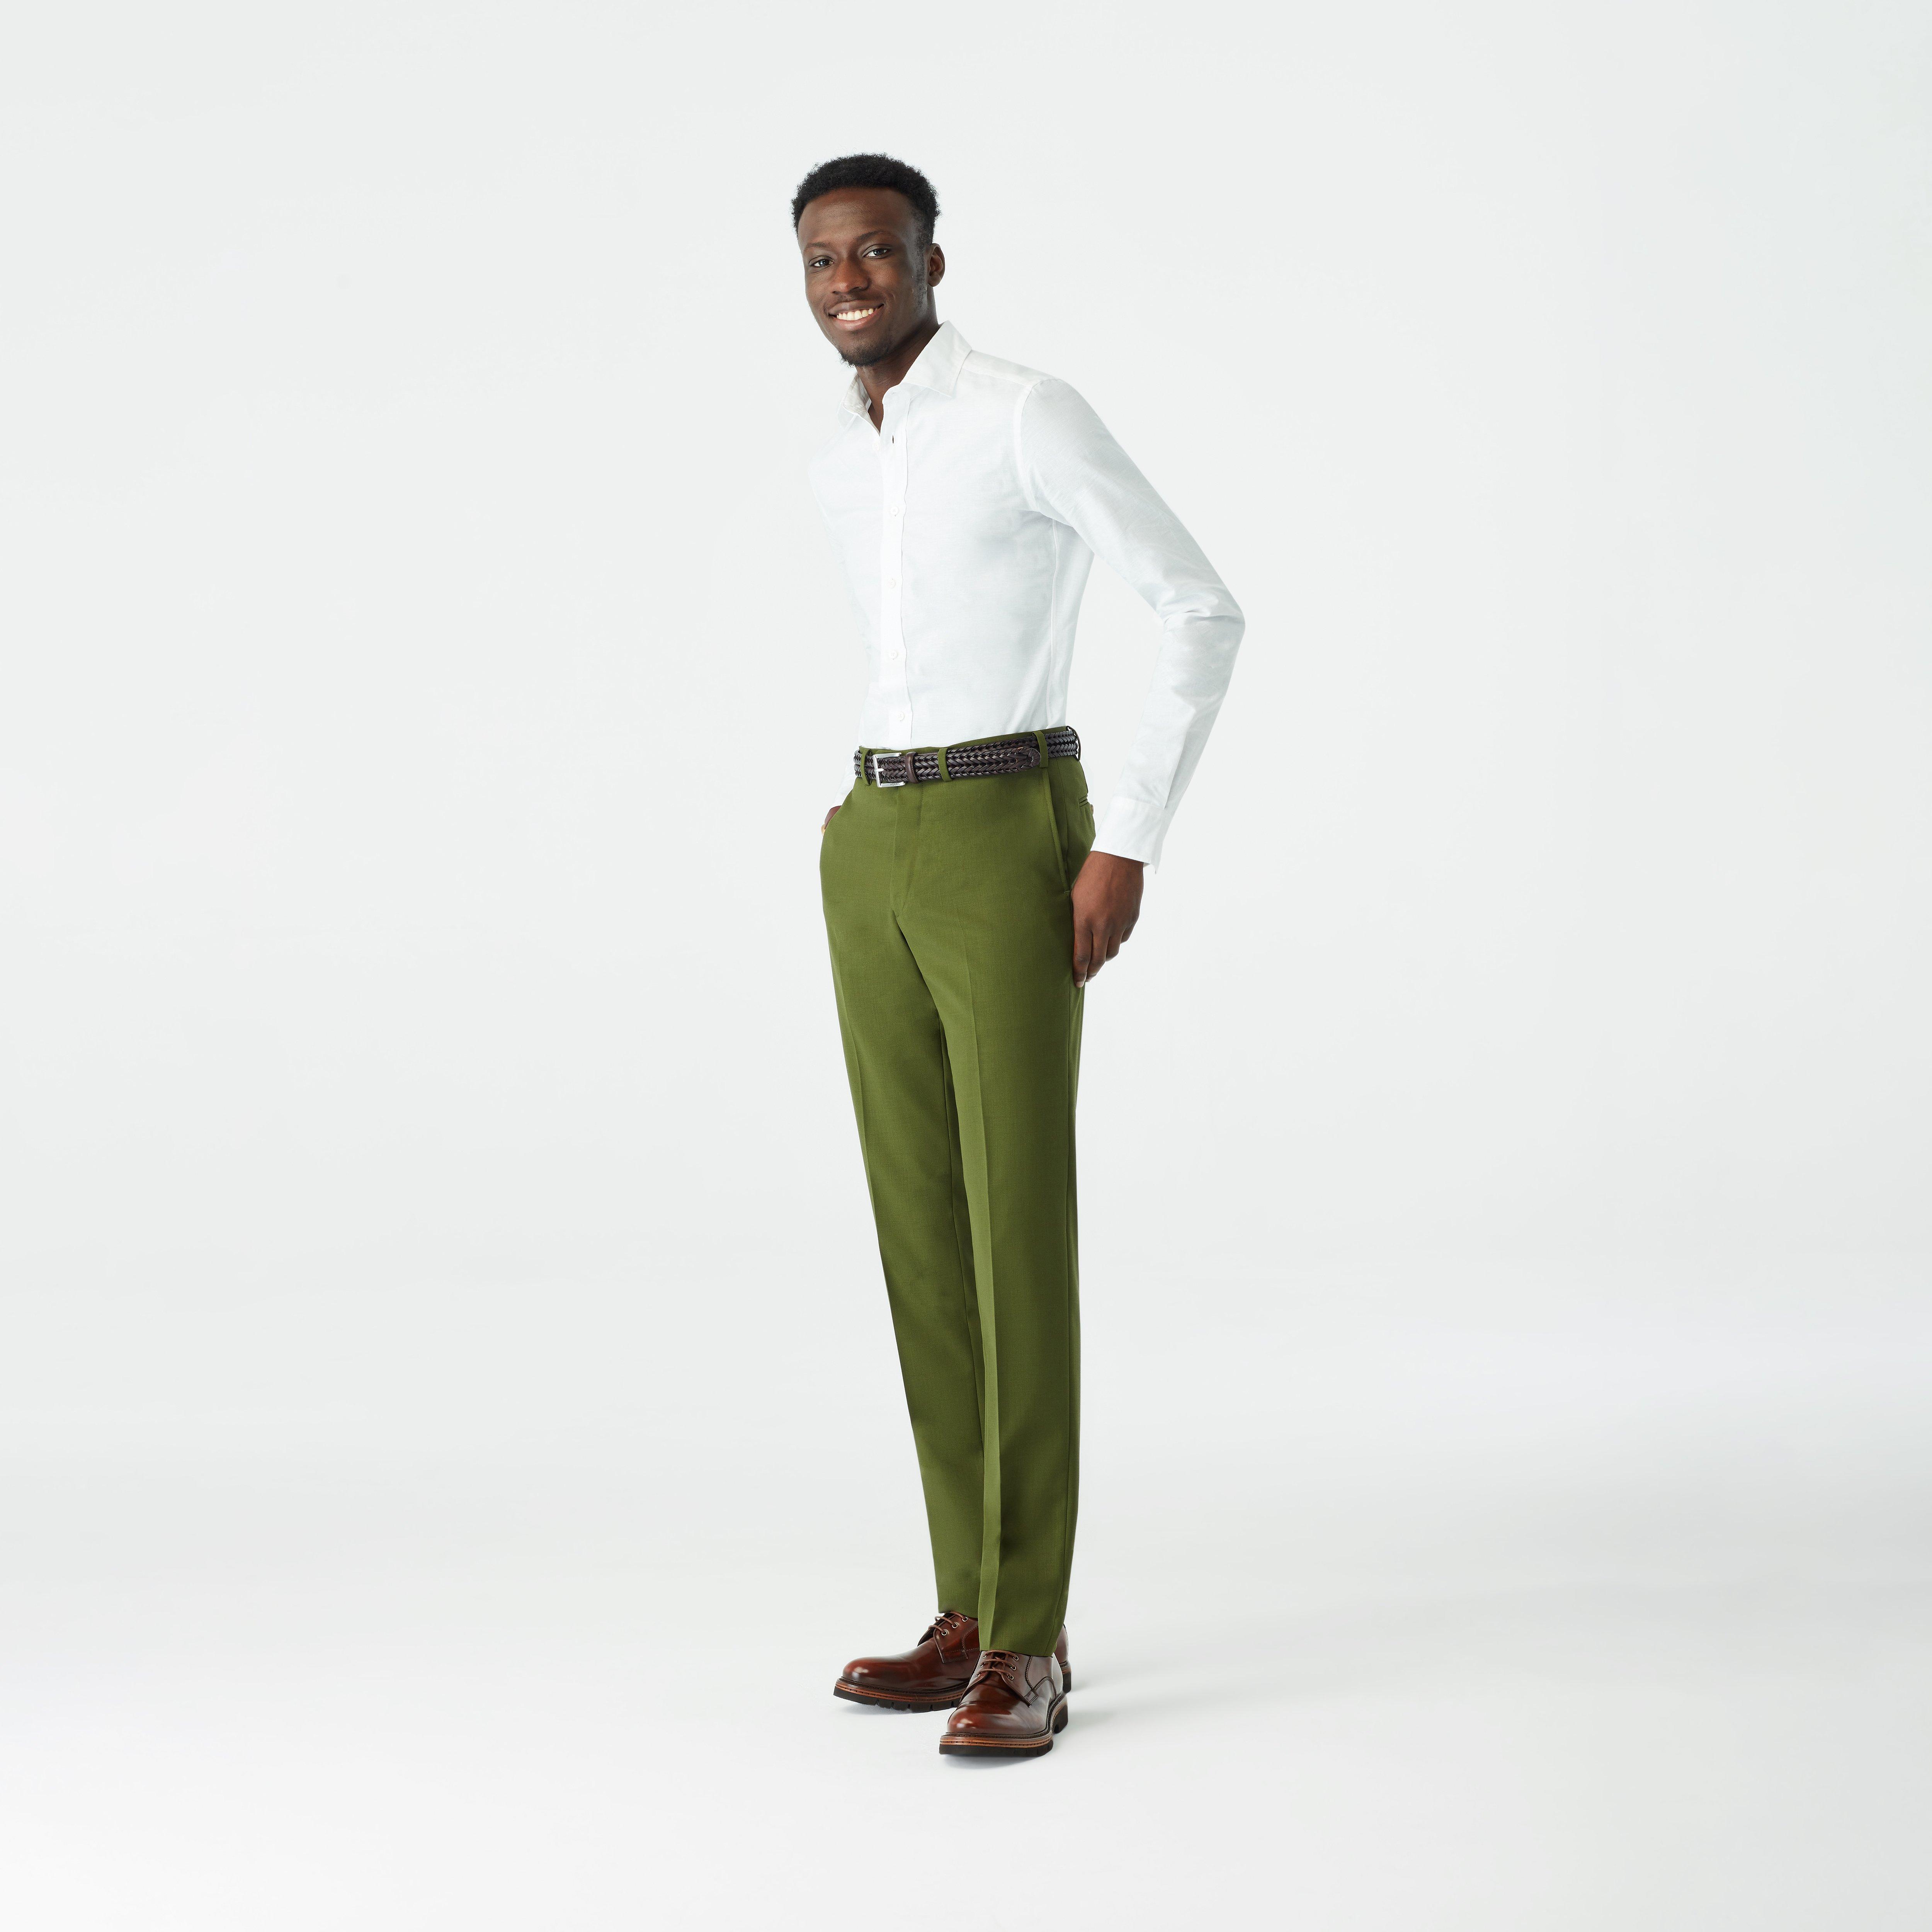 Best Men's Green Pants Outfit Ideas - Next Level Gents | Green pants men, Green  pants outfit, Khaki pants outfit